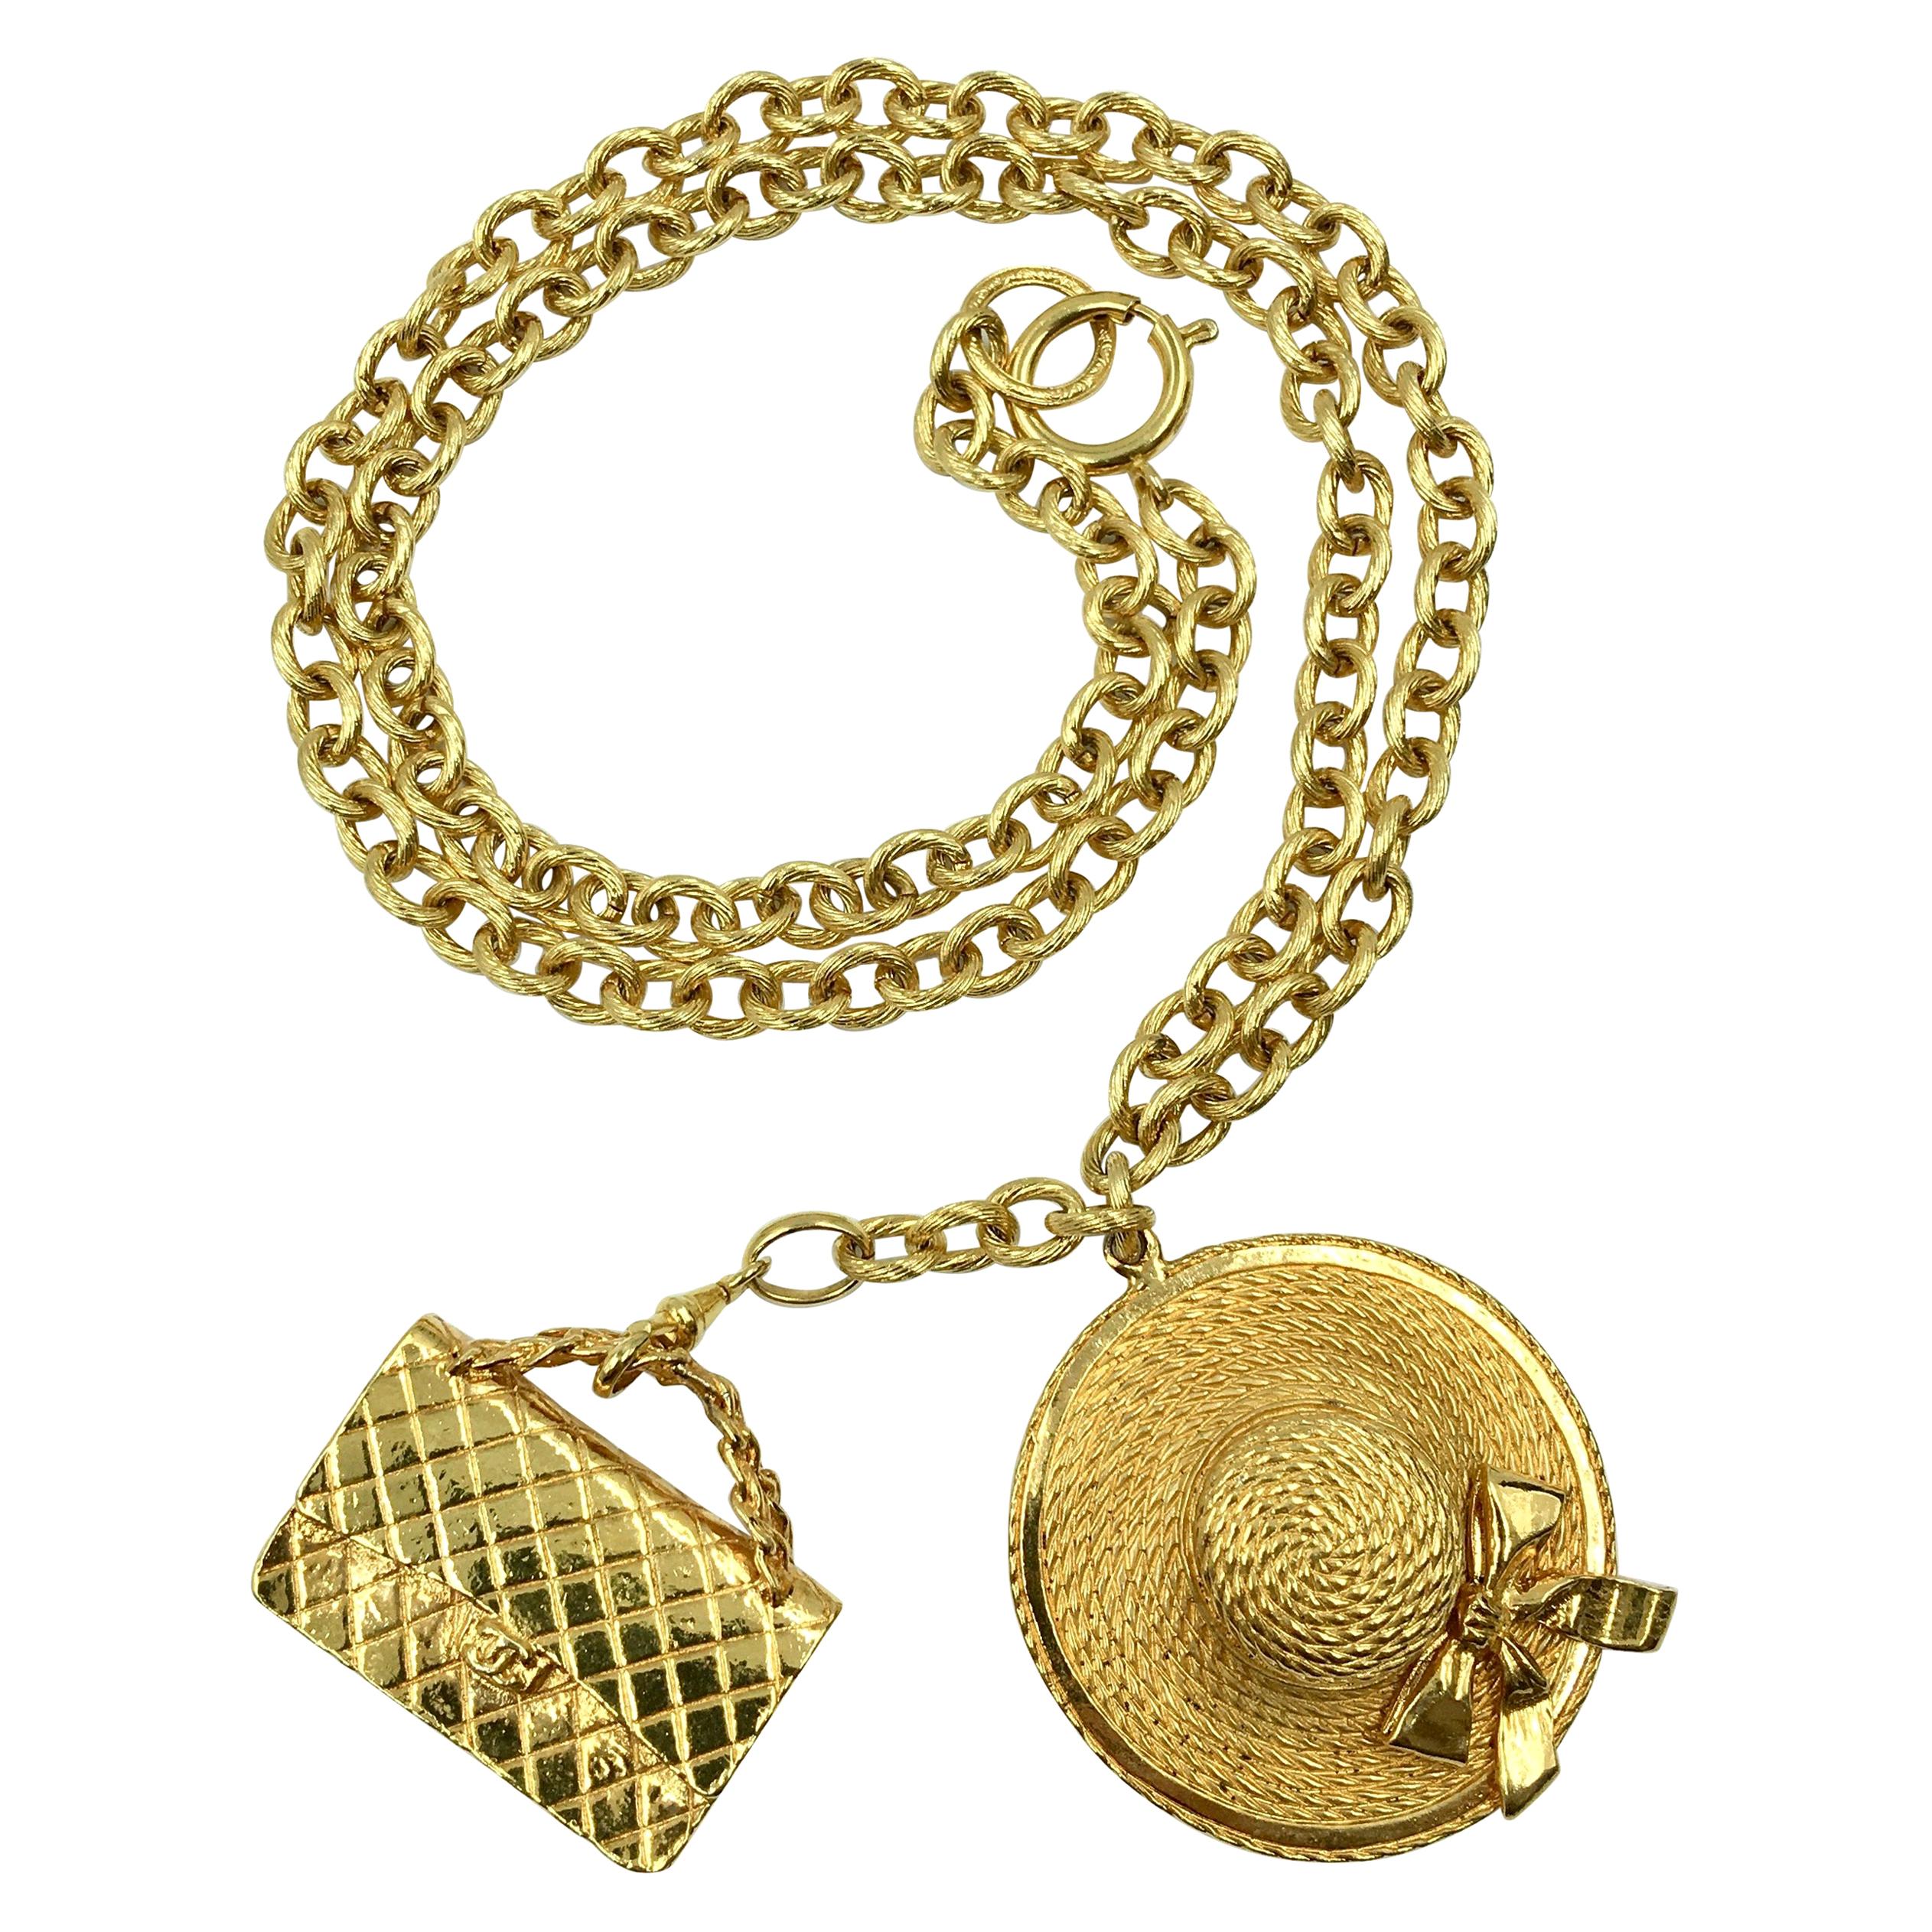 Chanel Gold Tone Classic Coco Chanel Chapeau and Quilted Handbag Charm Necklace For Sale